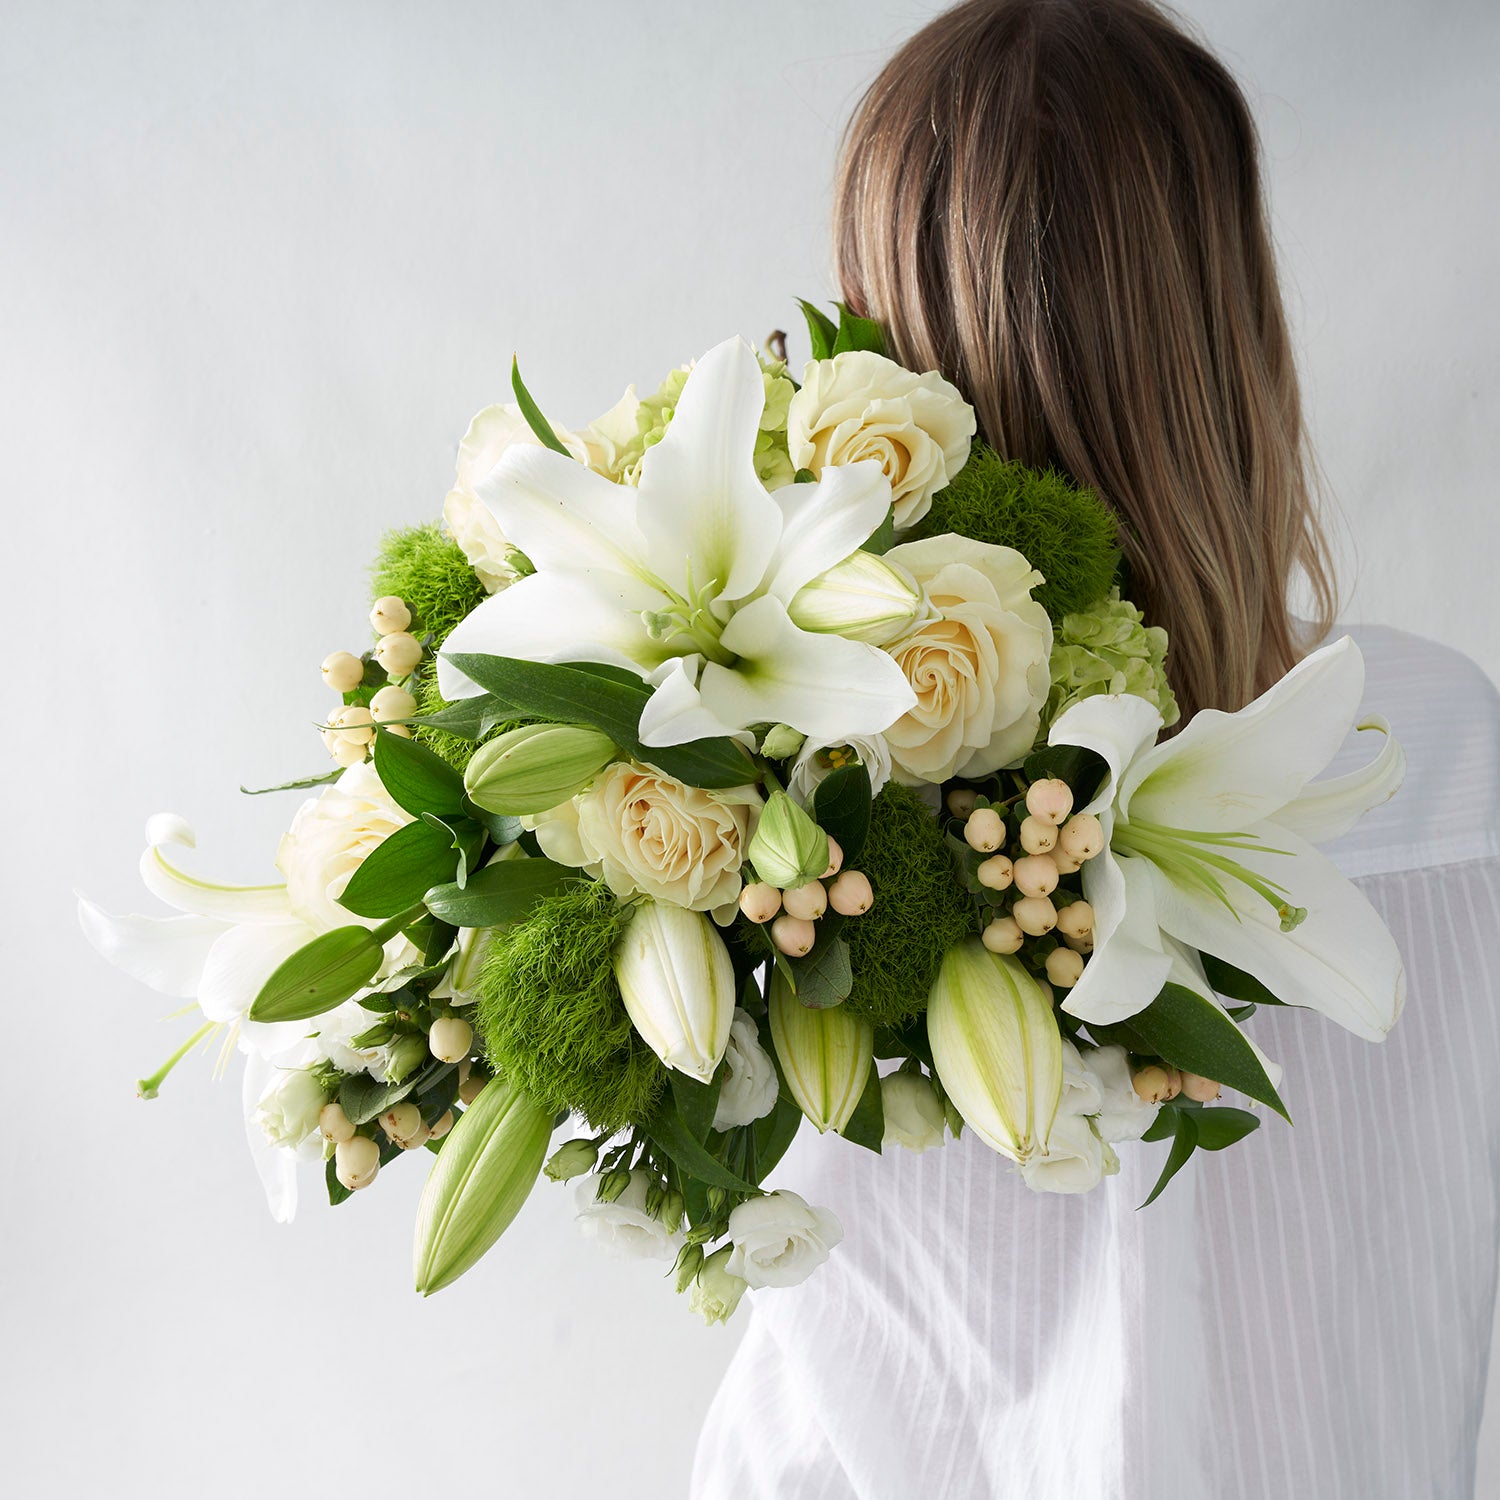 Woman in white shirt holding bouquet of white roses, white lilies, cream berries, green hydrangea and green dianthus.